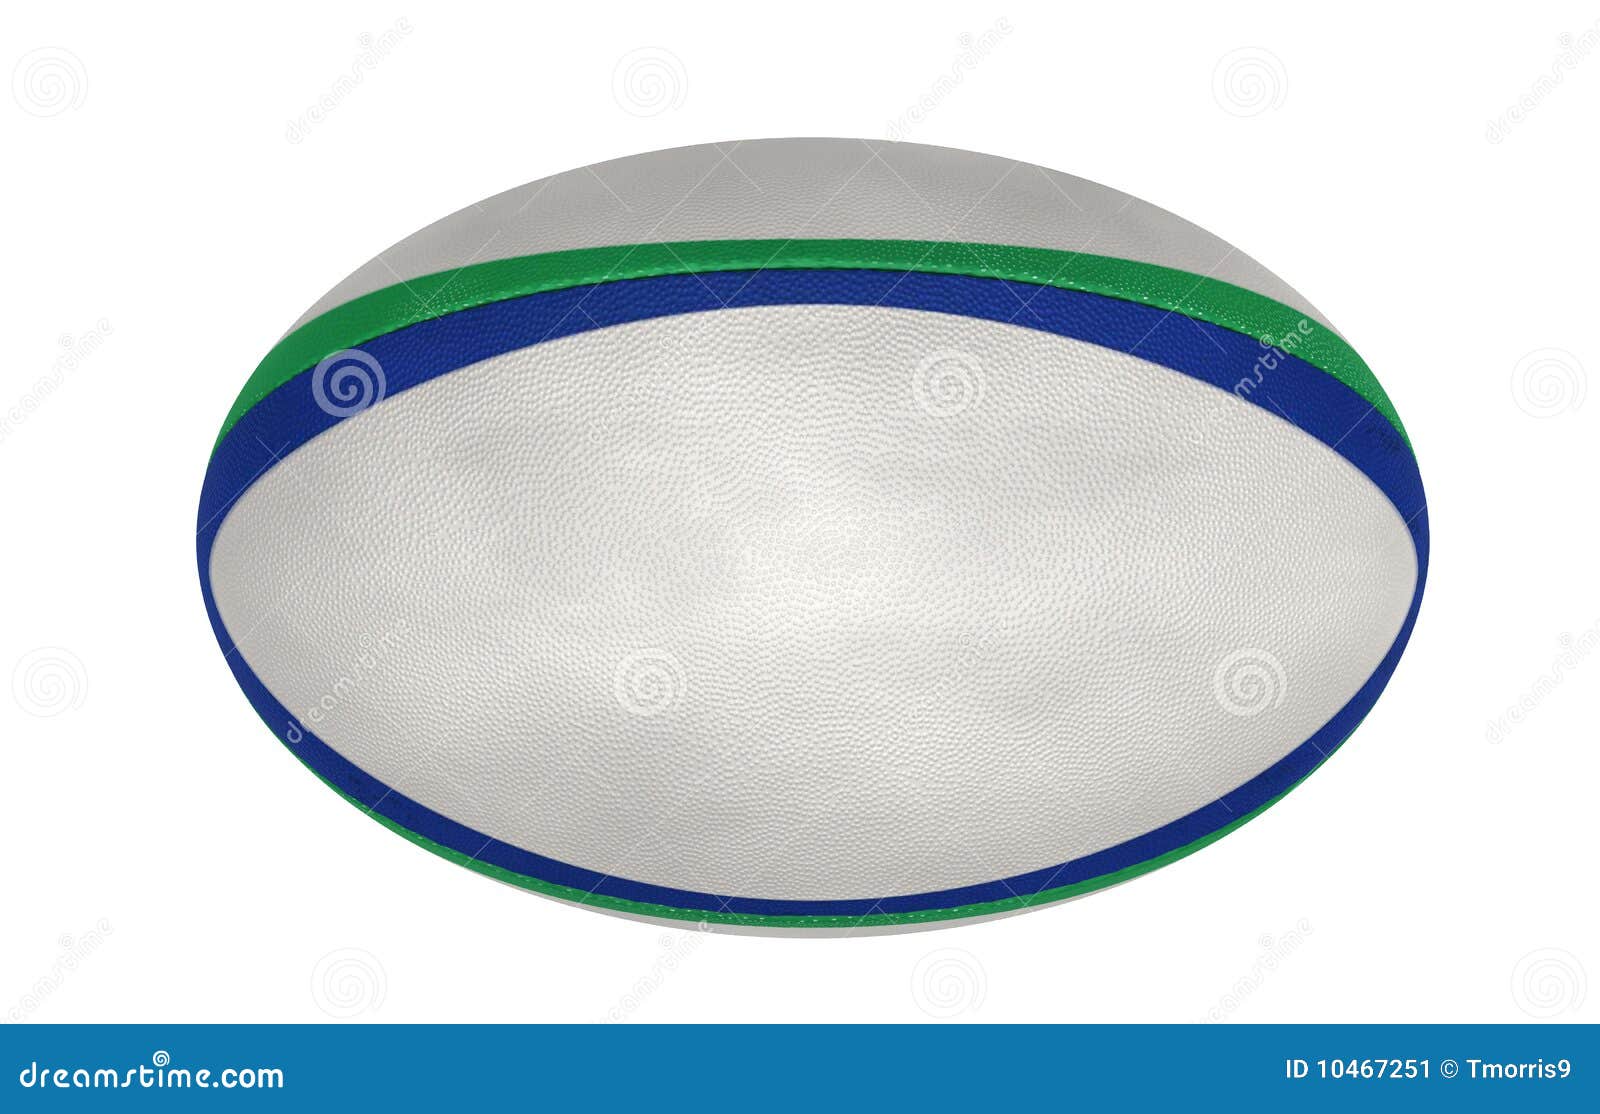 clipart rugby ball - photo #20